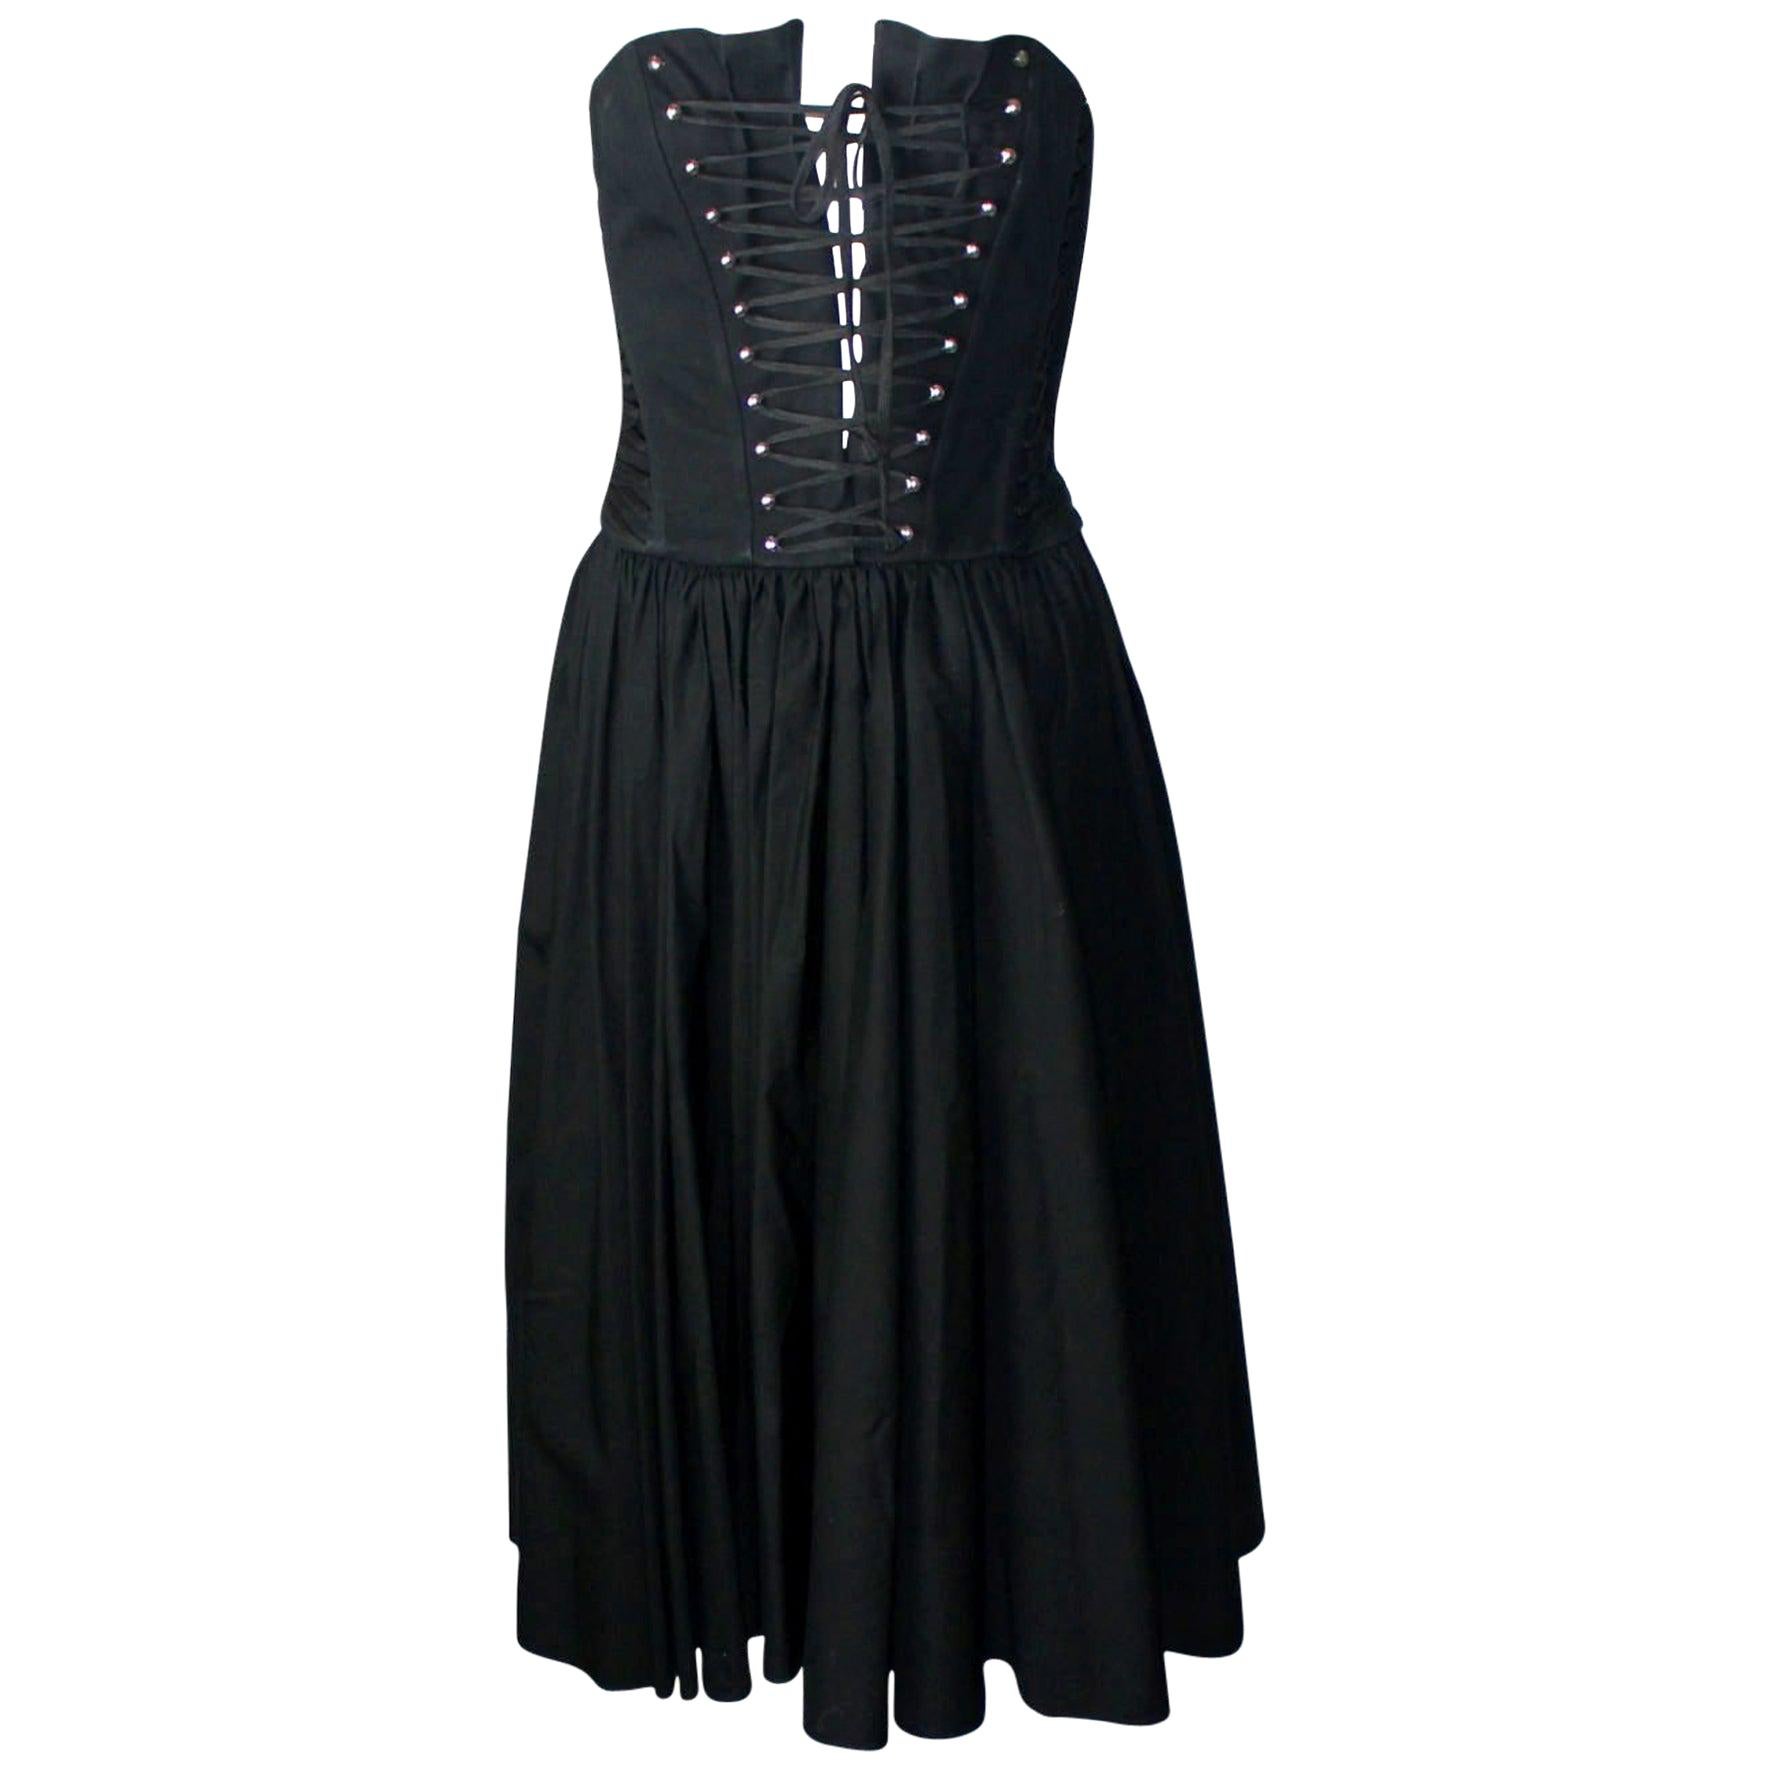 DOLCE & GABBANA Black Hourglass Boned Corset Lace Up Dress 42 In Good Condition For Sale In Switzerland, CH